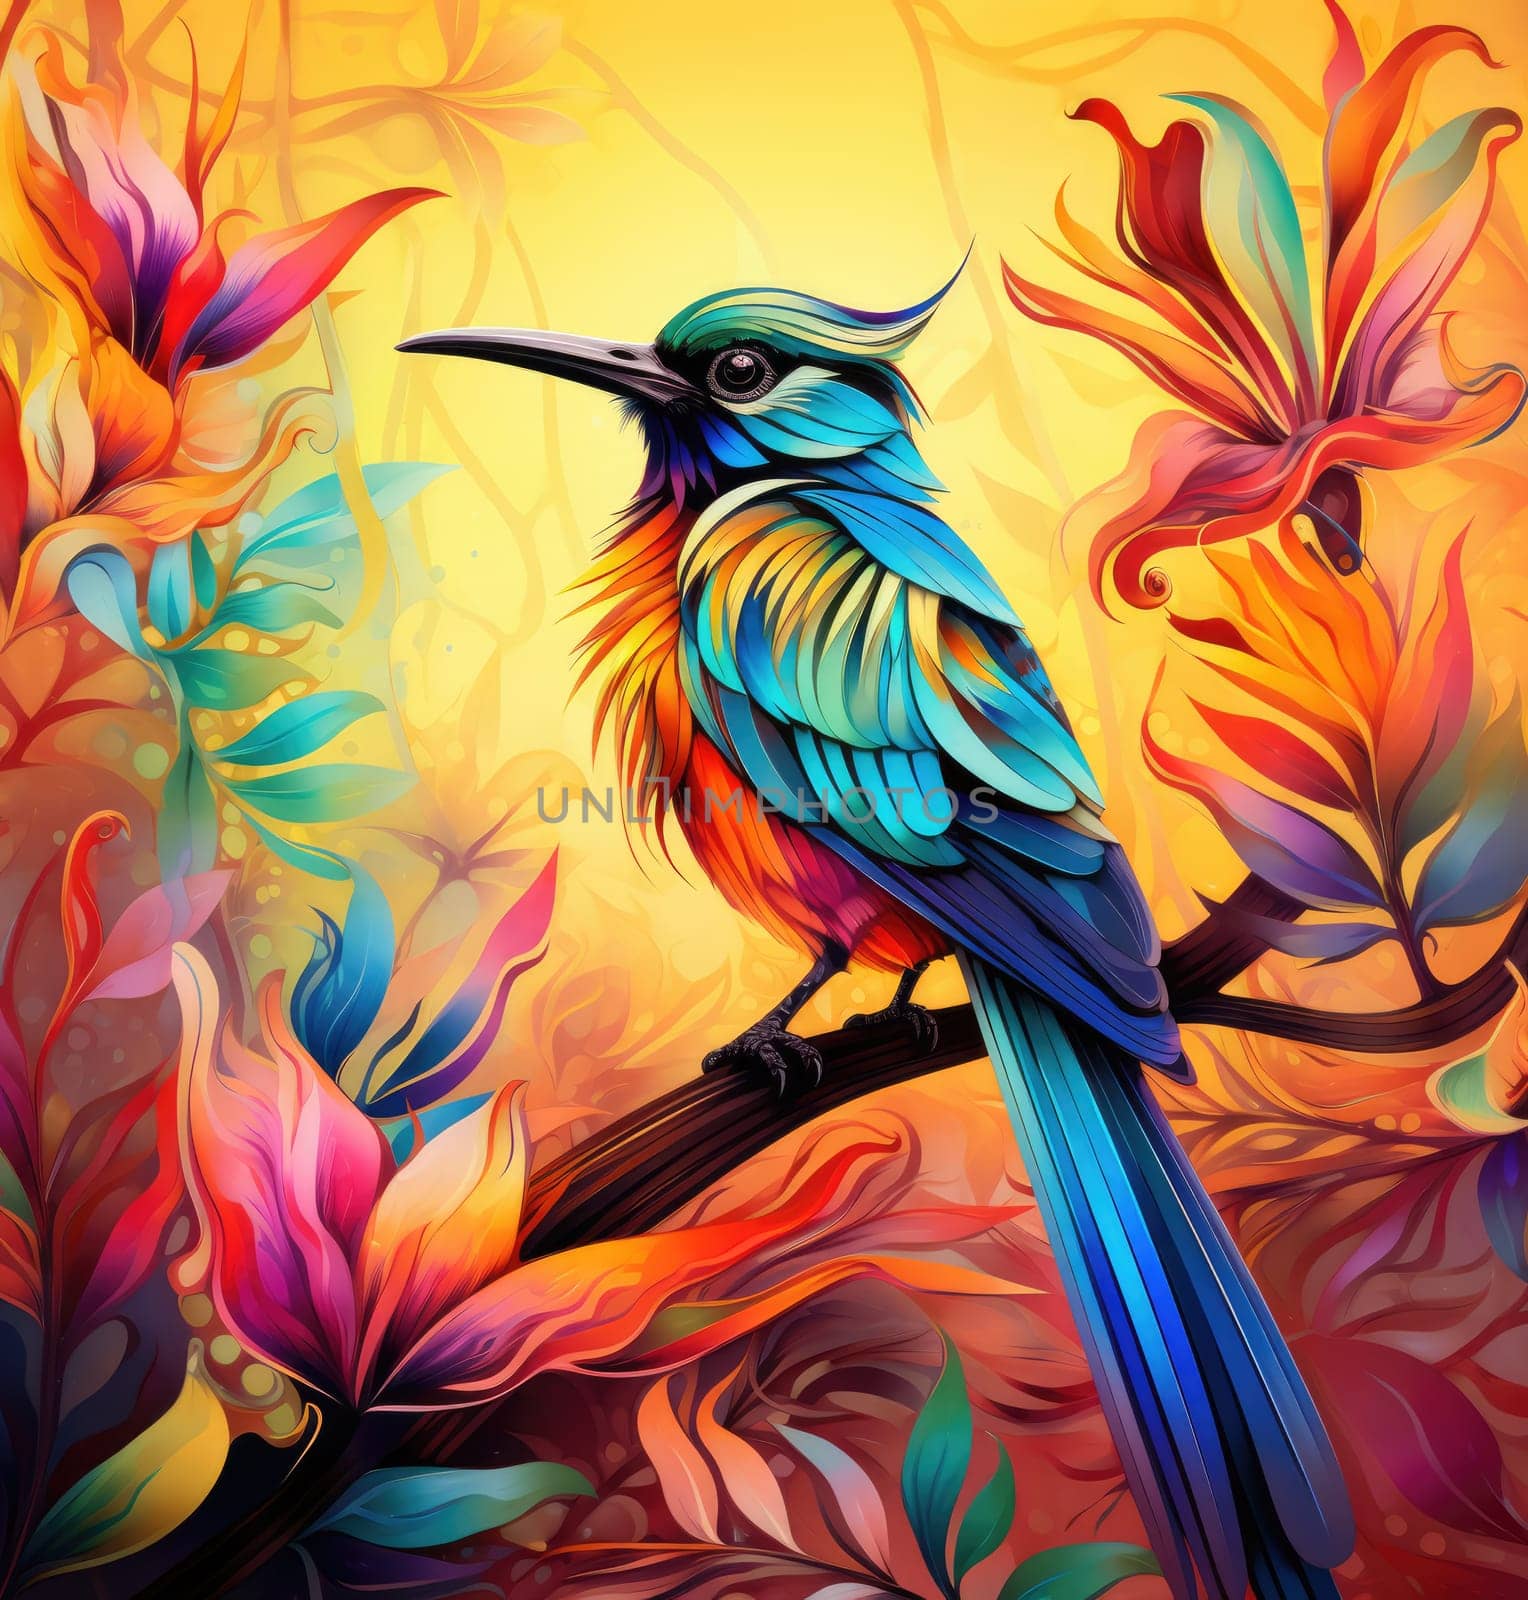 Bird of paradise. Romantic illustration of colorful tropical bird of paradise painting on a floral background. 